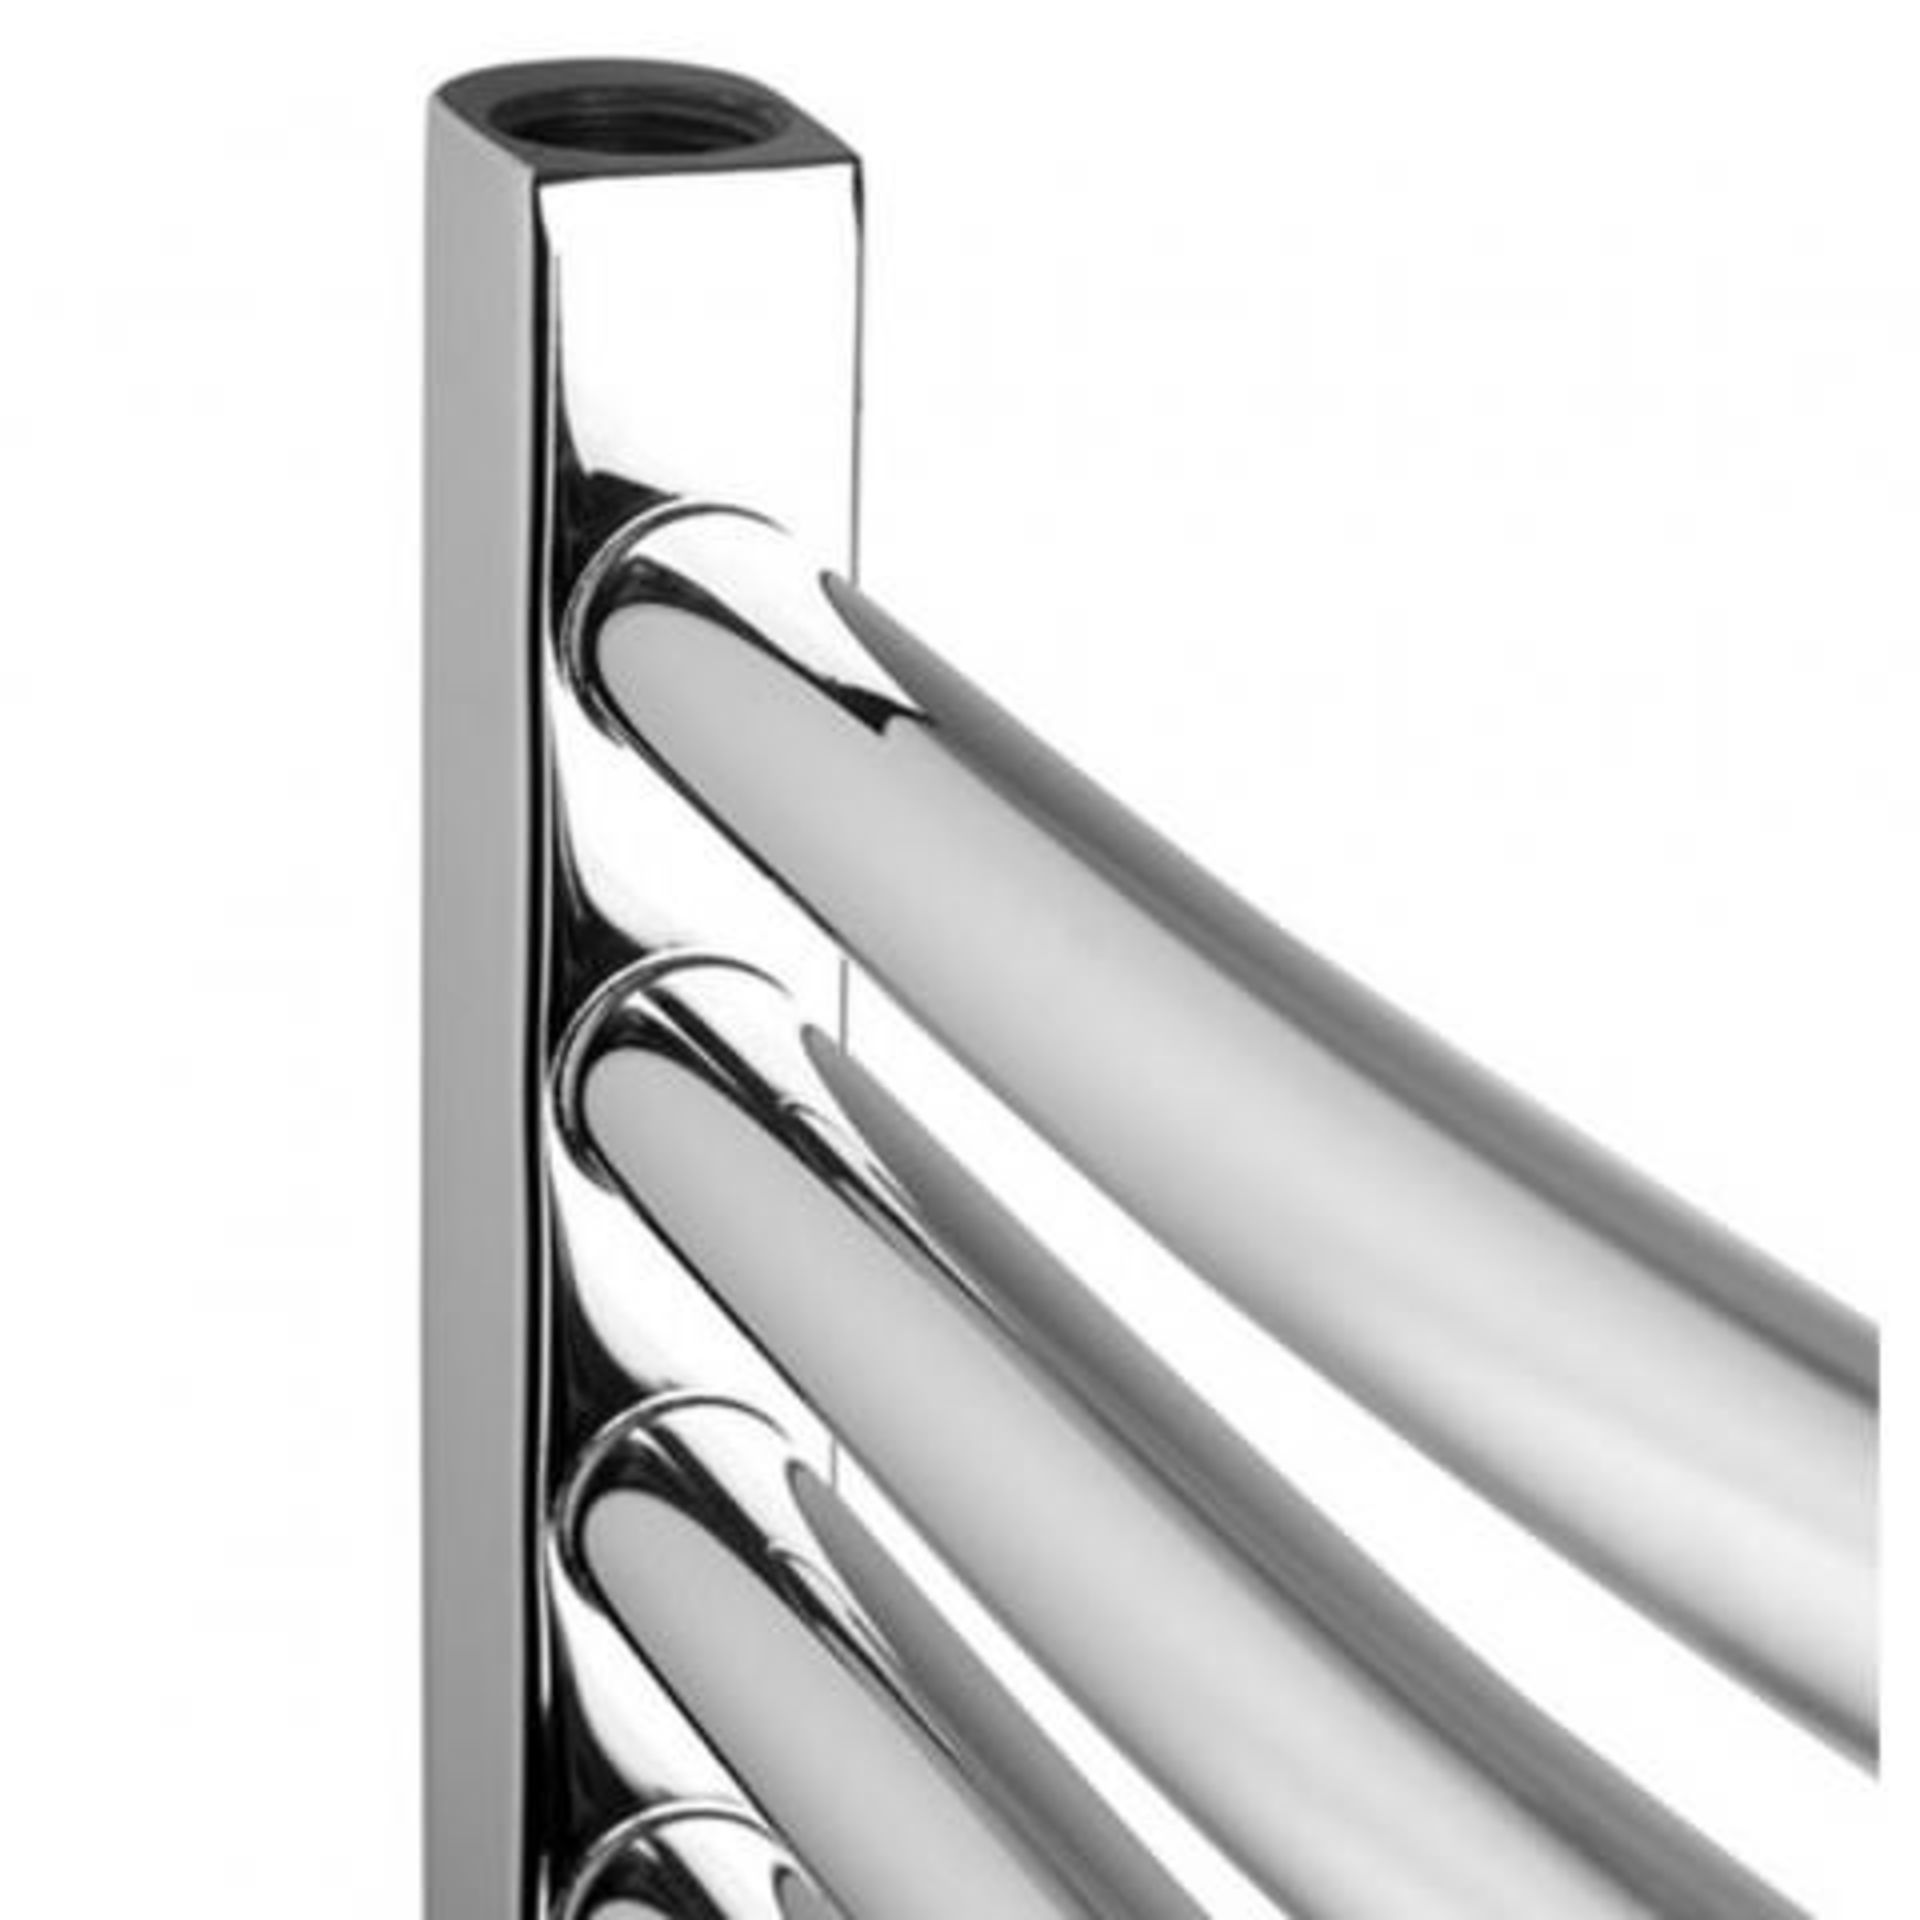 BRAND NEW BOXED 1200x600mm - 20mm Tubes - RRP £219.99.Chrome Curved Rail Ladder Towel Radiator... - Image 3 of 3